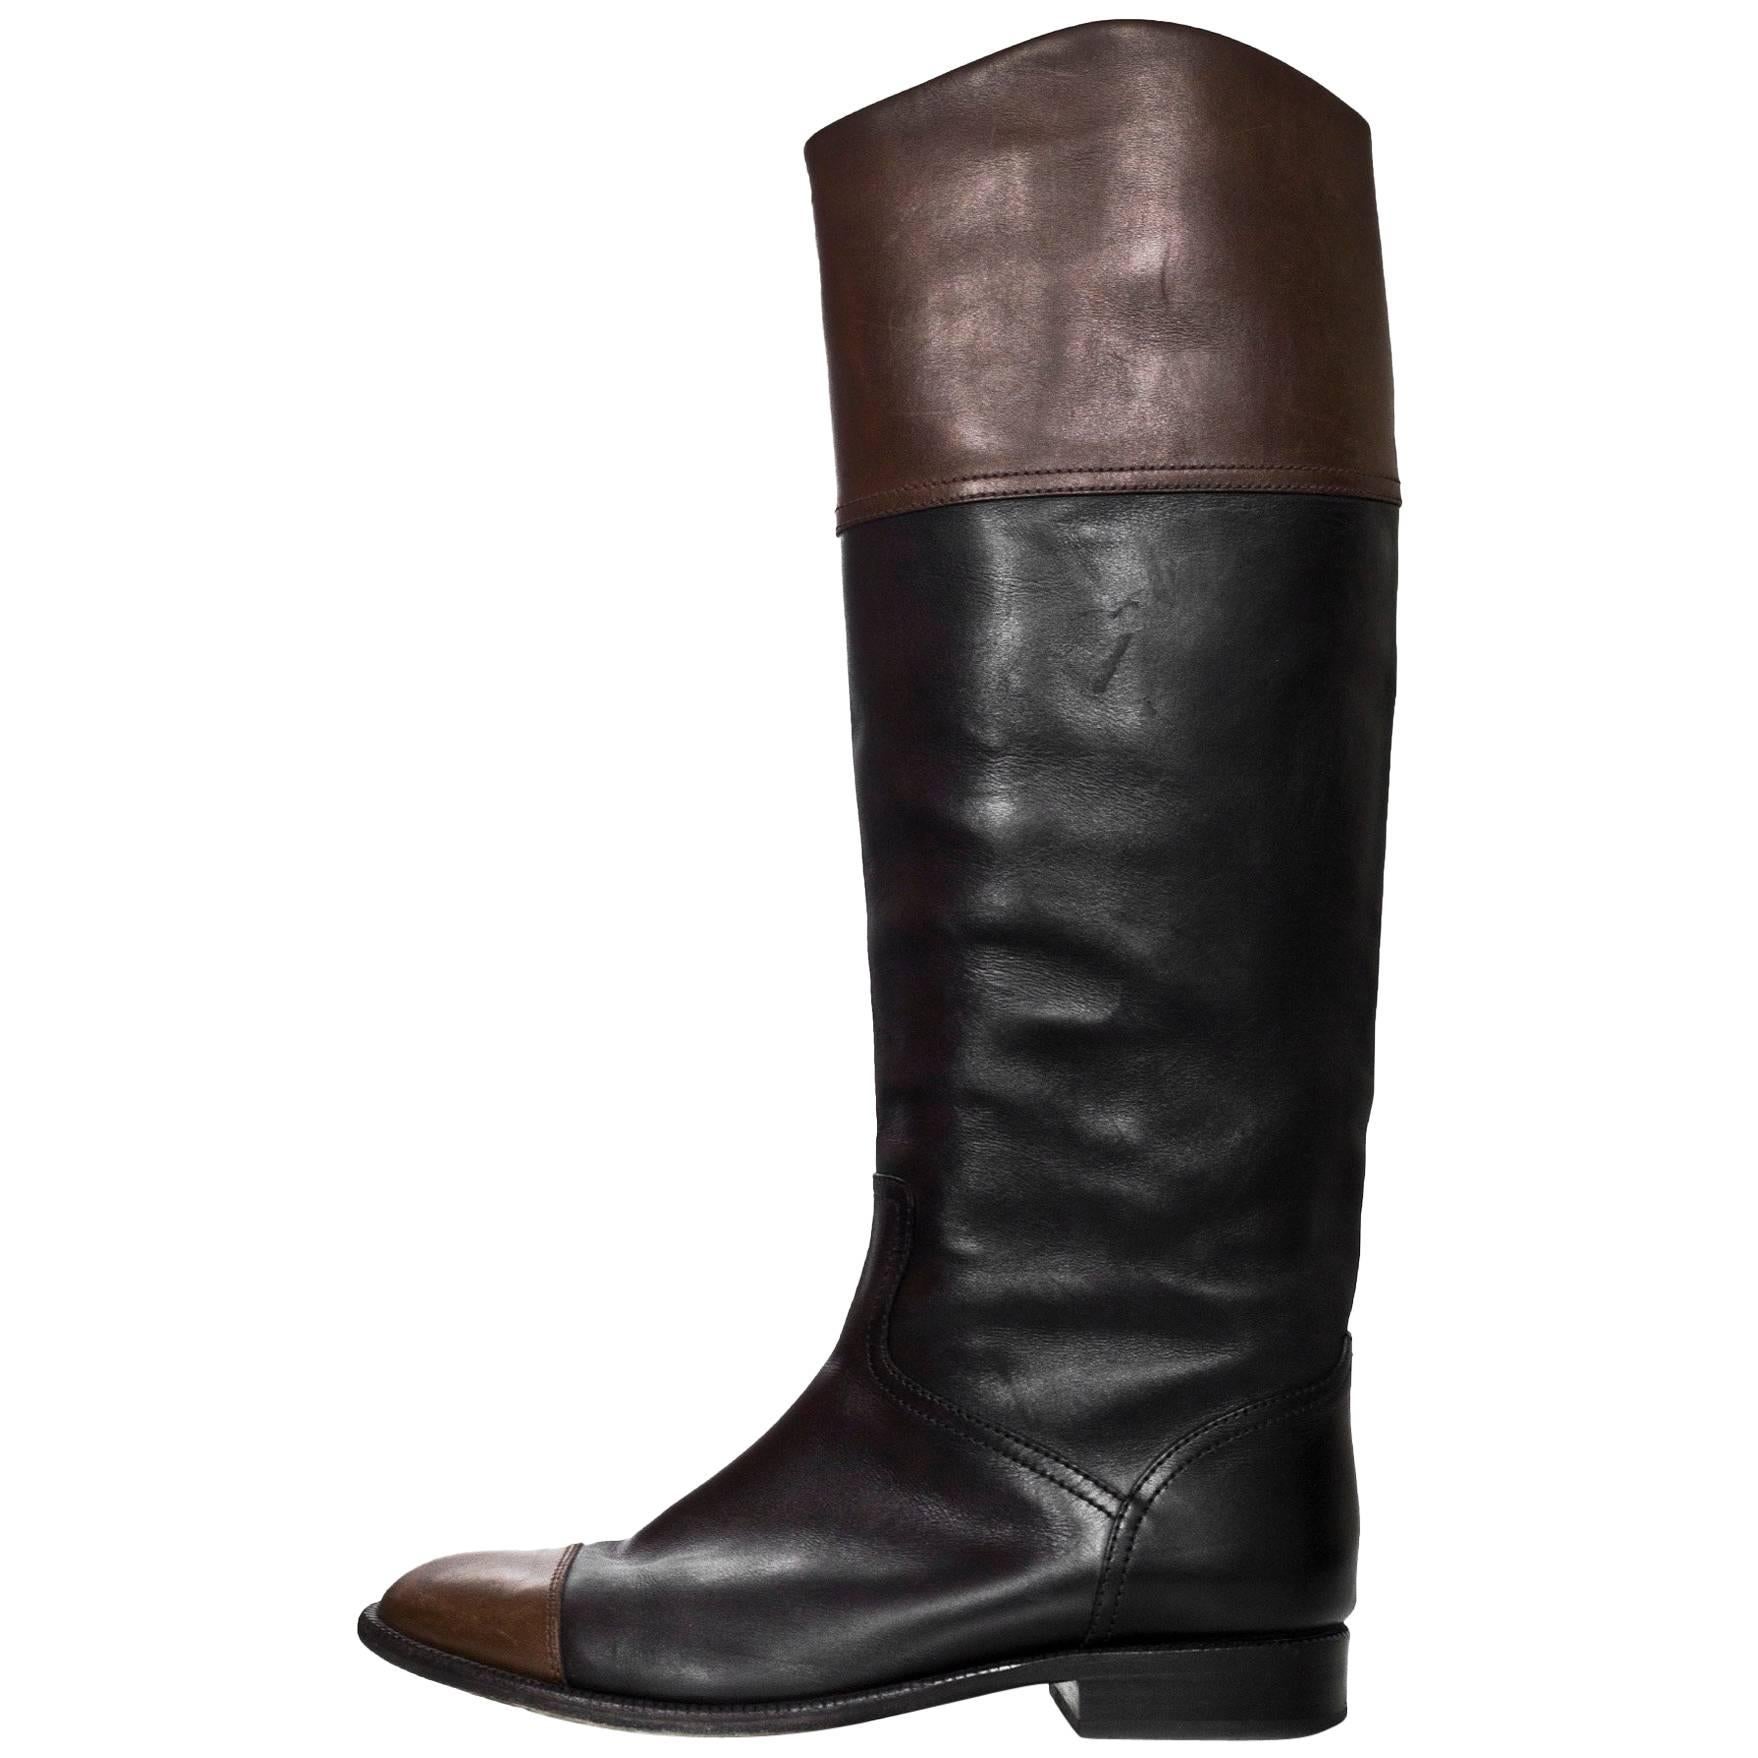 Chanel Black & Brown Leather Cap-Toe Riding Boots Sz 41